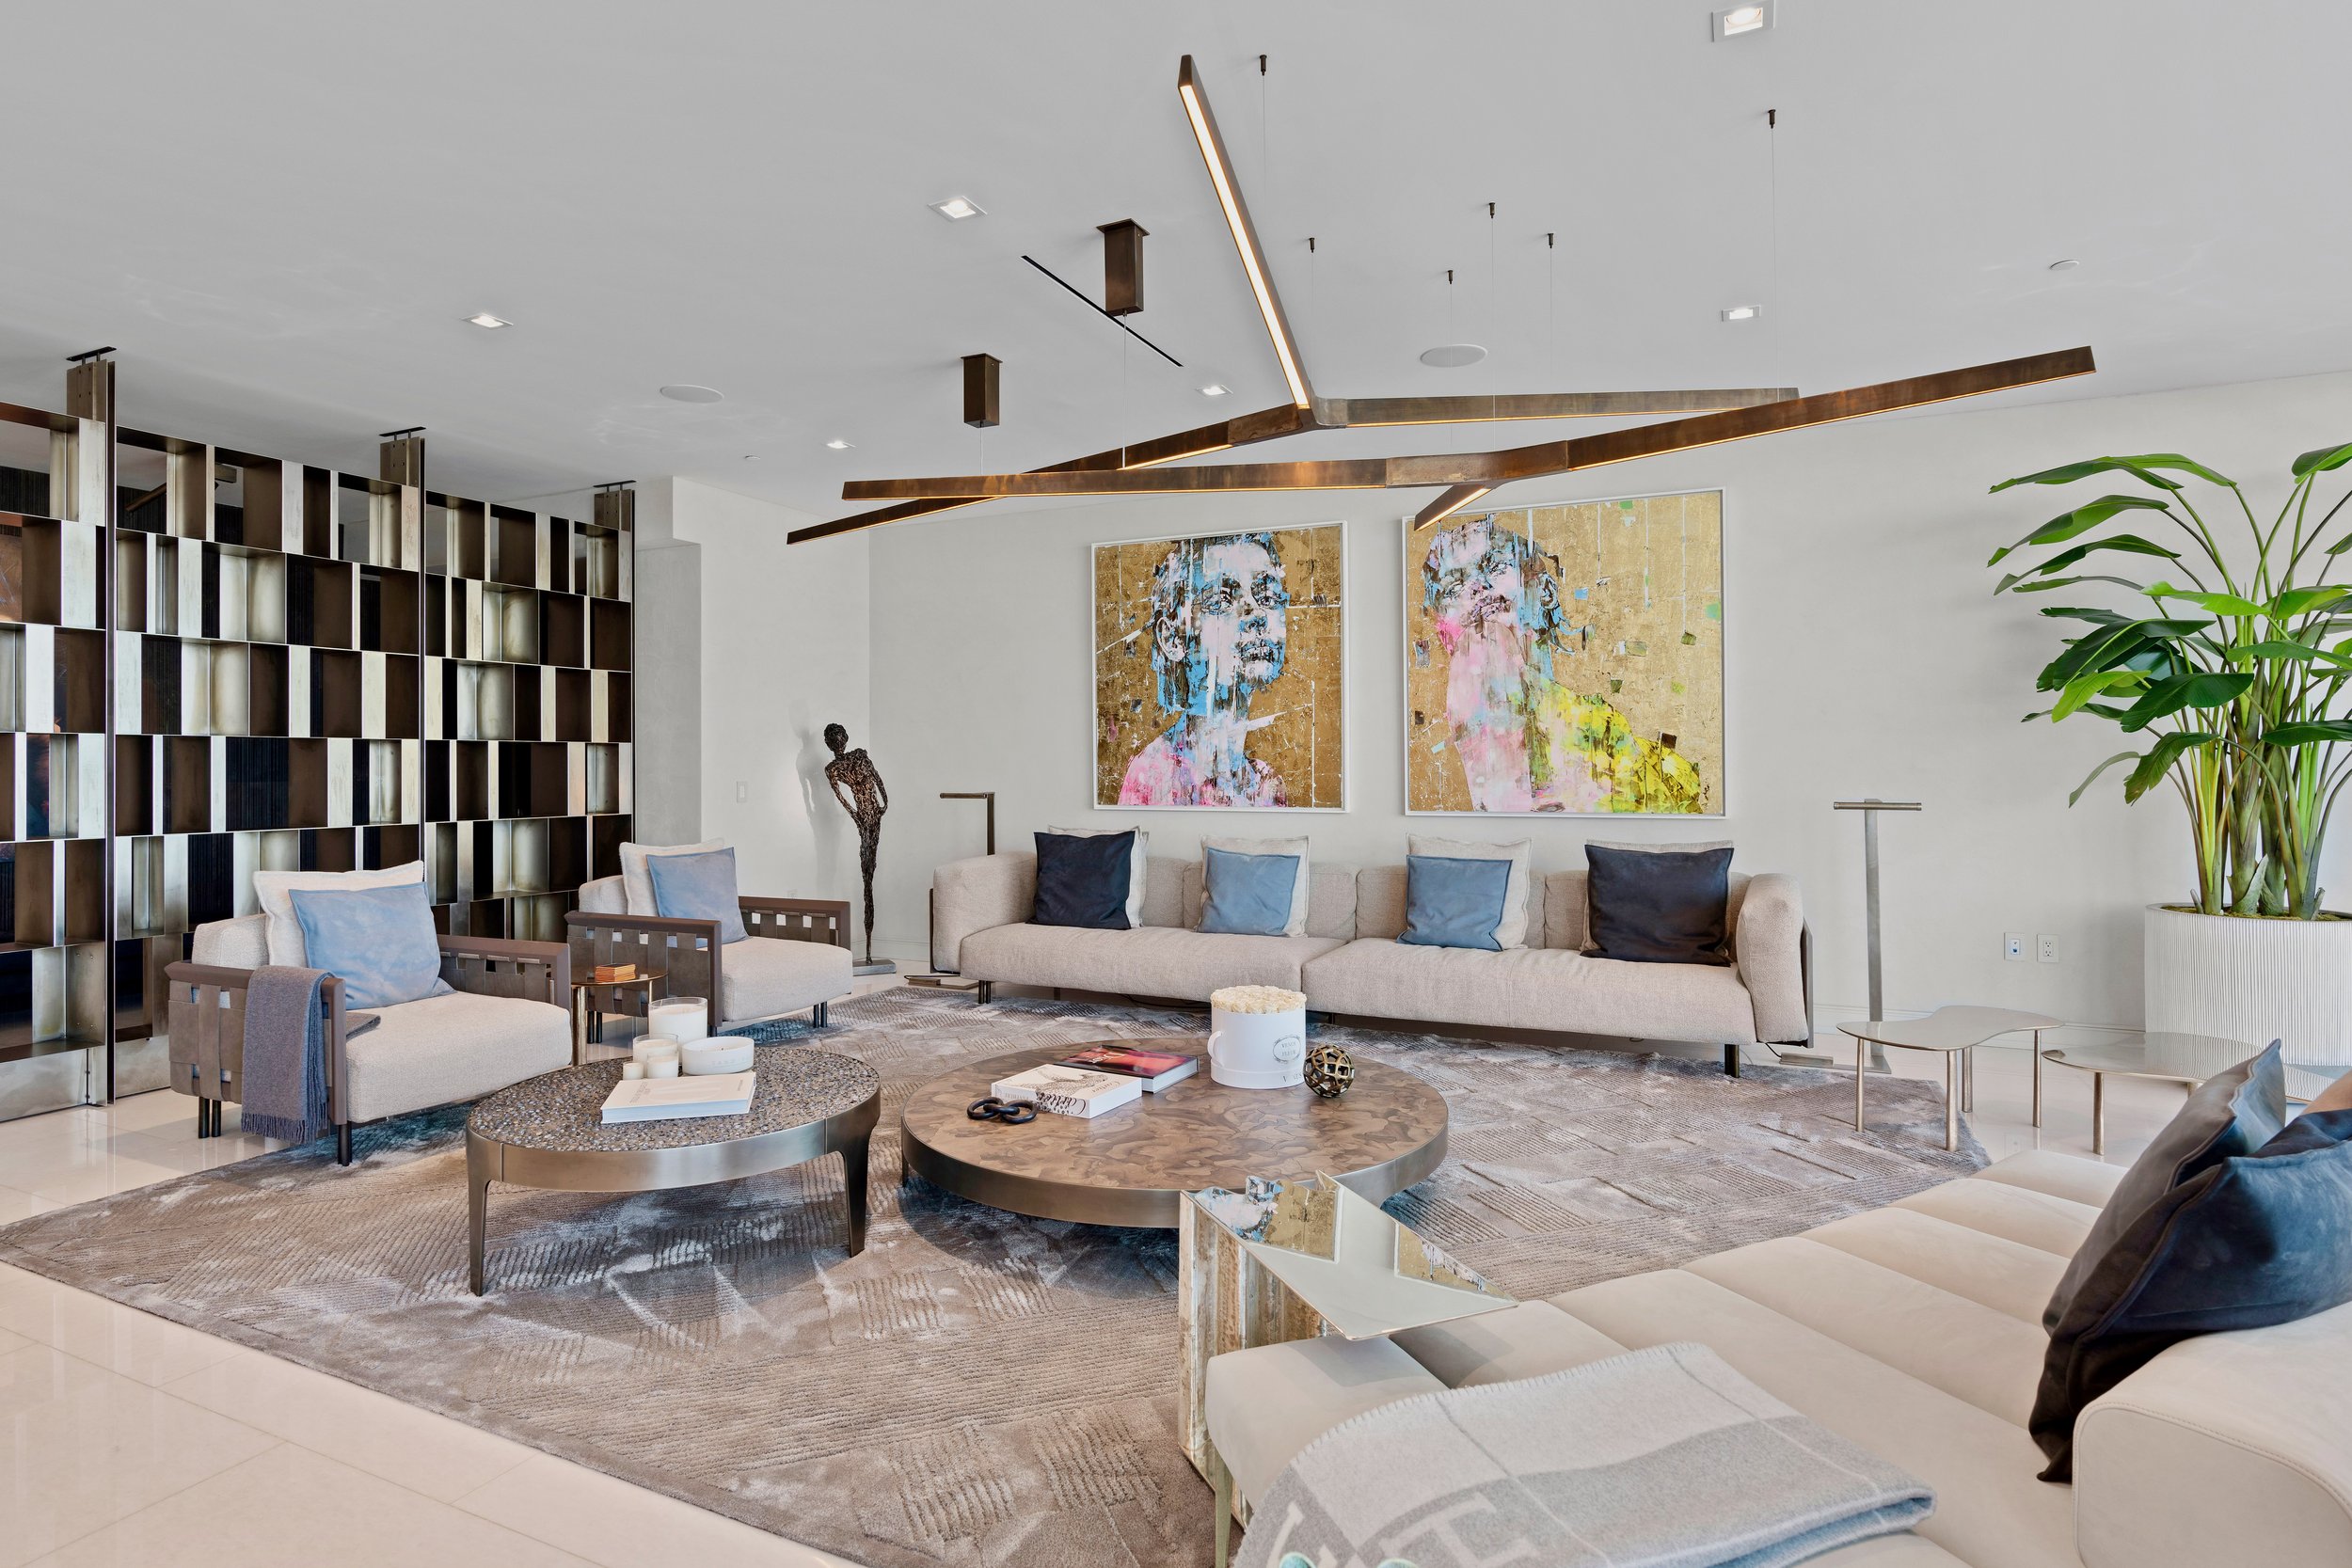 Step Inside An Ultra-Luxe Condo At The Bristol In West Palm Beach Asking $23.9 Million, Over $4,600 Per Square Foot 10.jpg